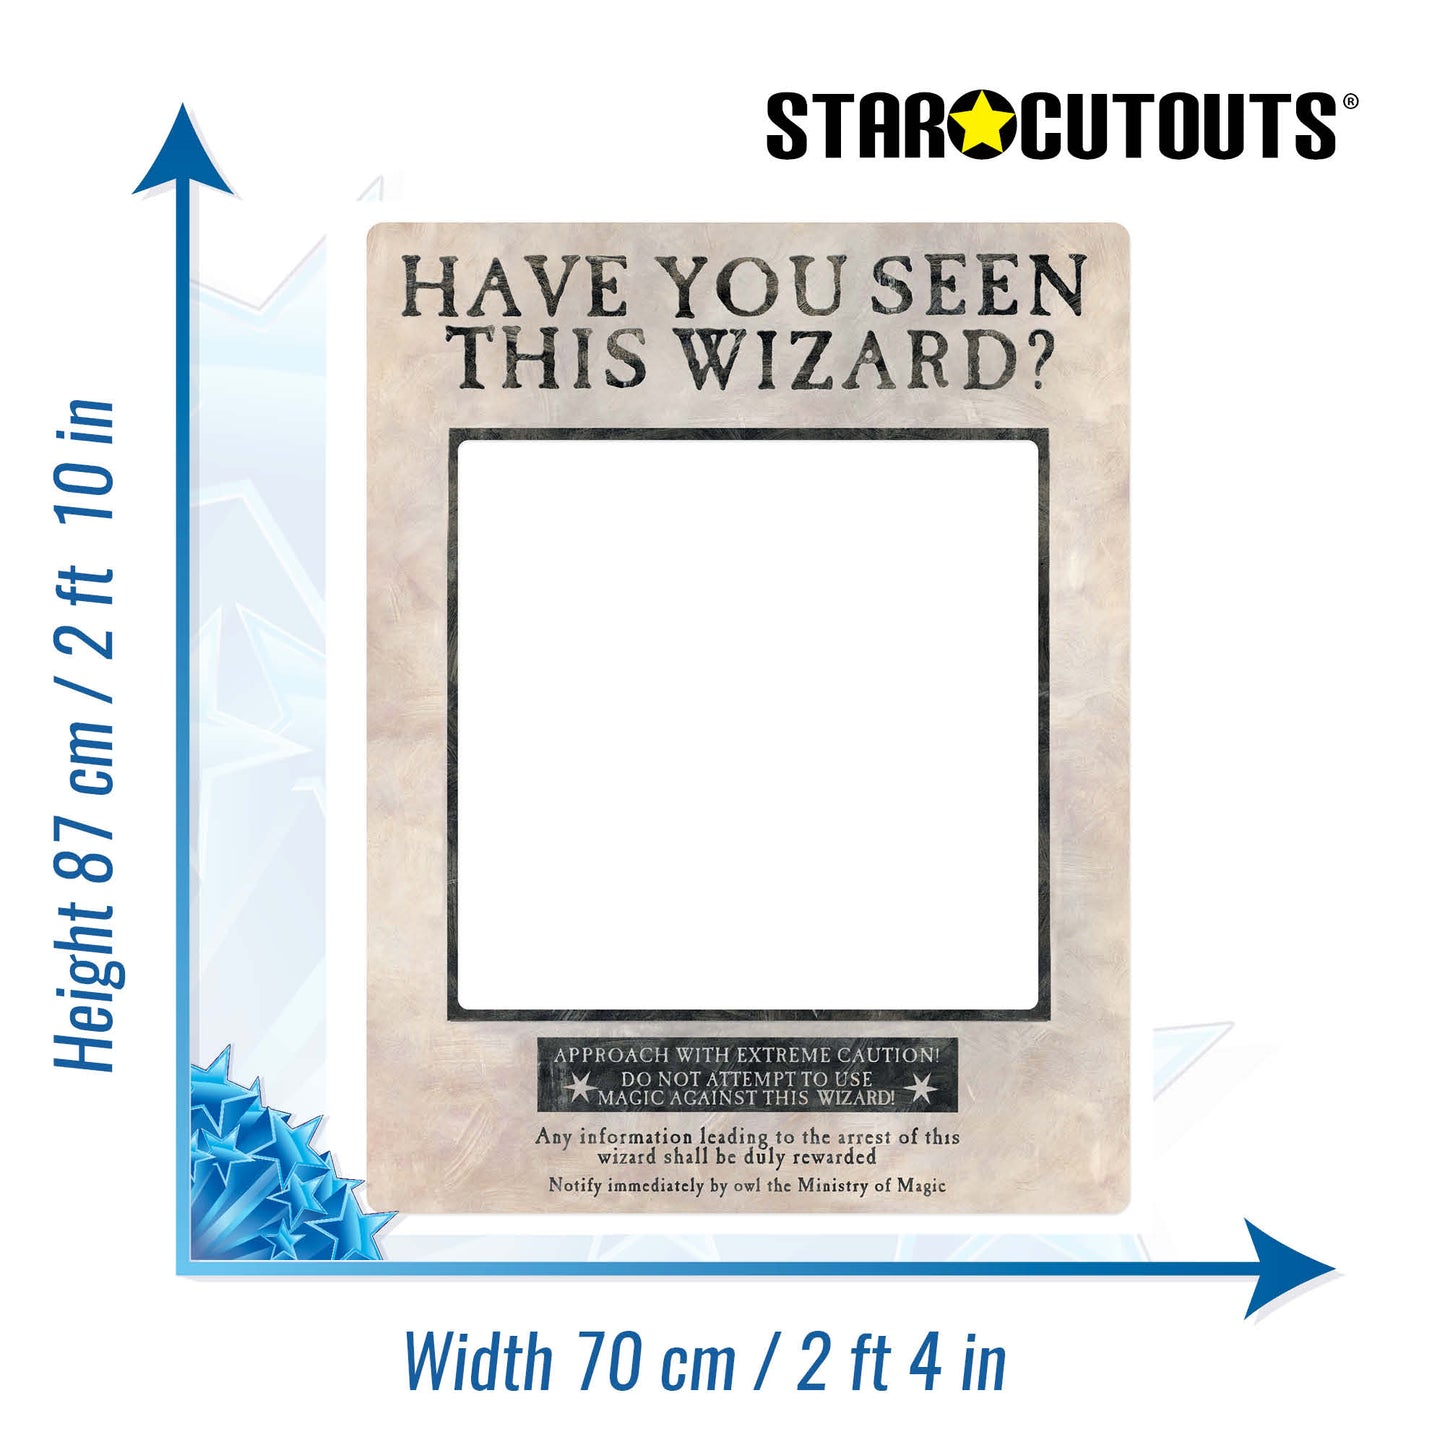 Cardboard Cutout  Harry Potter Wanted Poster White Selfie Frame Have You Seen This Wizard?